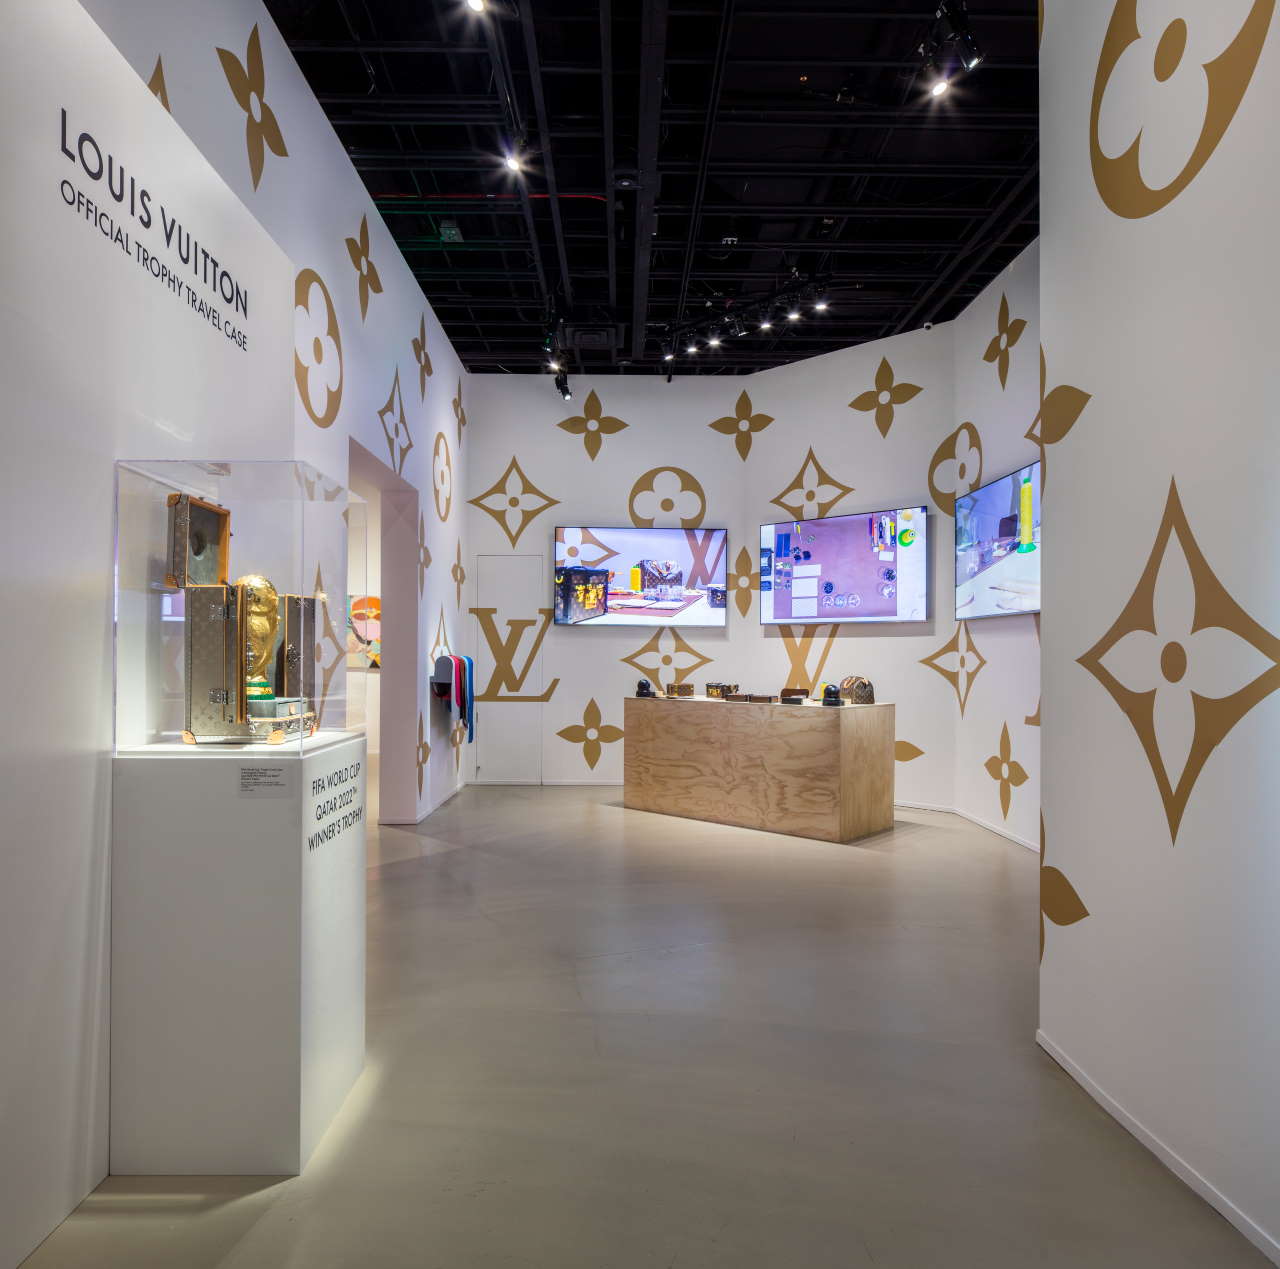 Explore 160 years of Louis Vuitton heritage at this pop-up